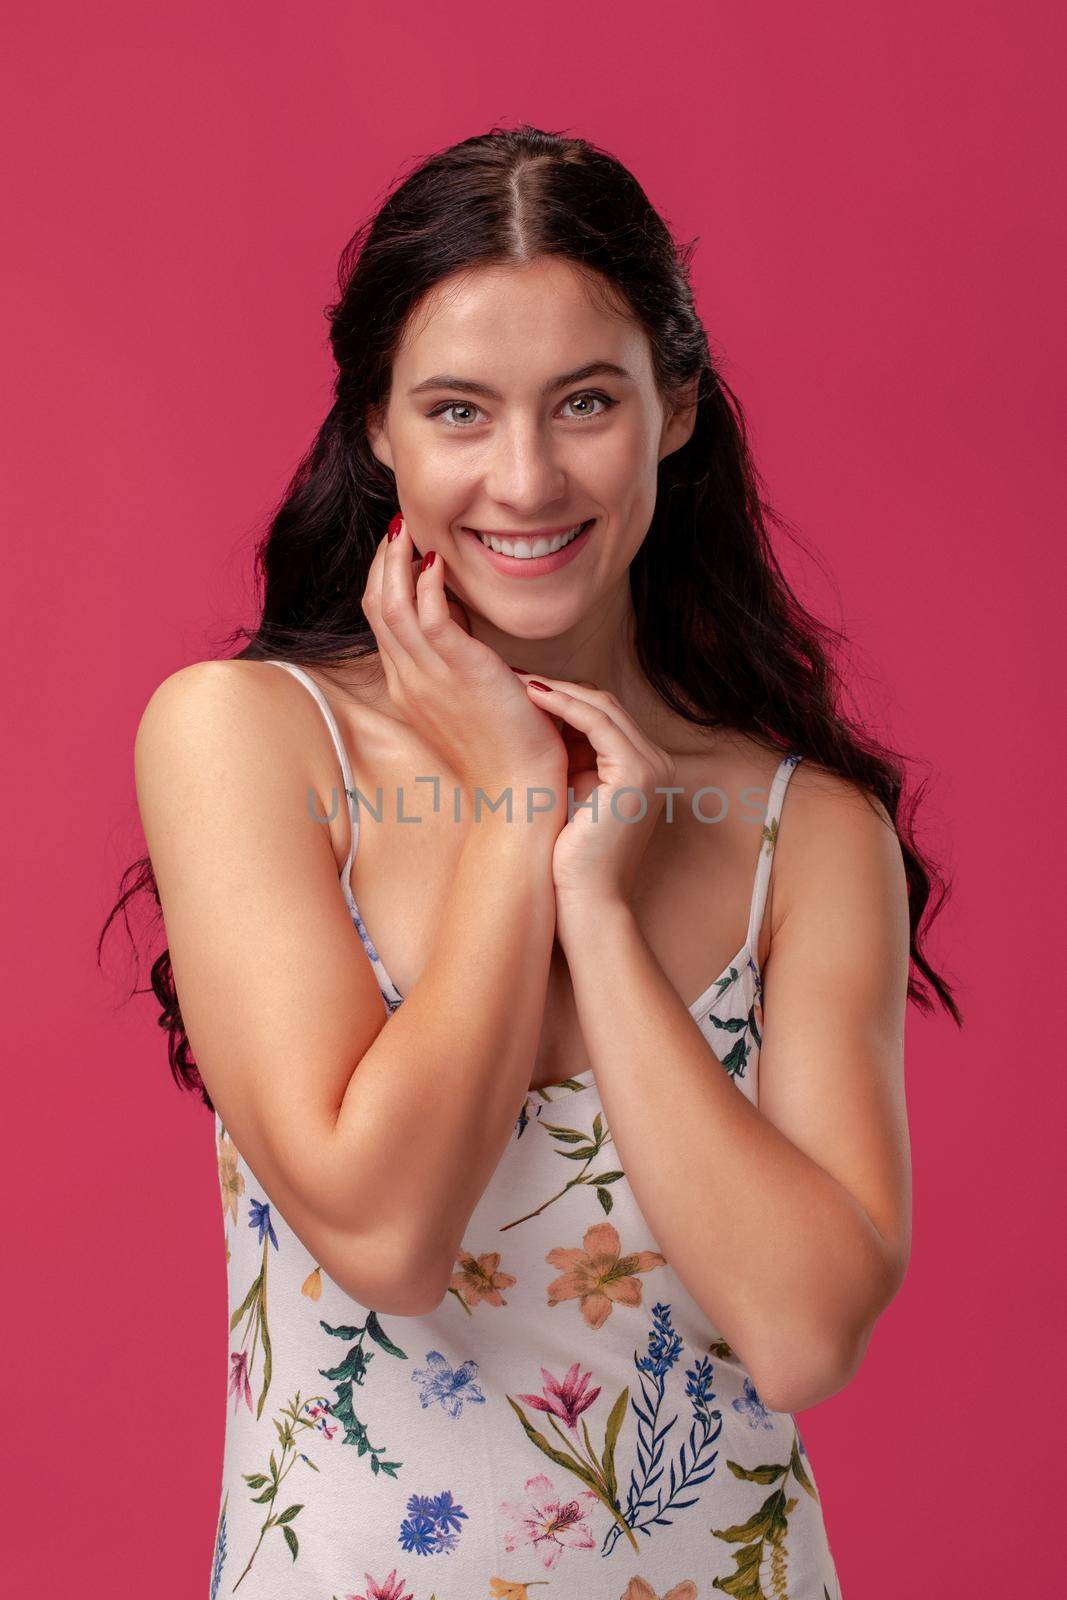 Portrait of a smiling brunette woman with a long curly hair, wearing in a white dress with floral print and standing on a pink wall background in studio. She folded her hands on a chest and looking at the camera. People sincere emotions, lifestyle concept. Mockup copy space.